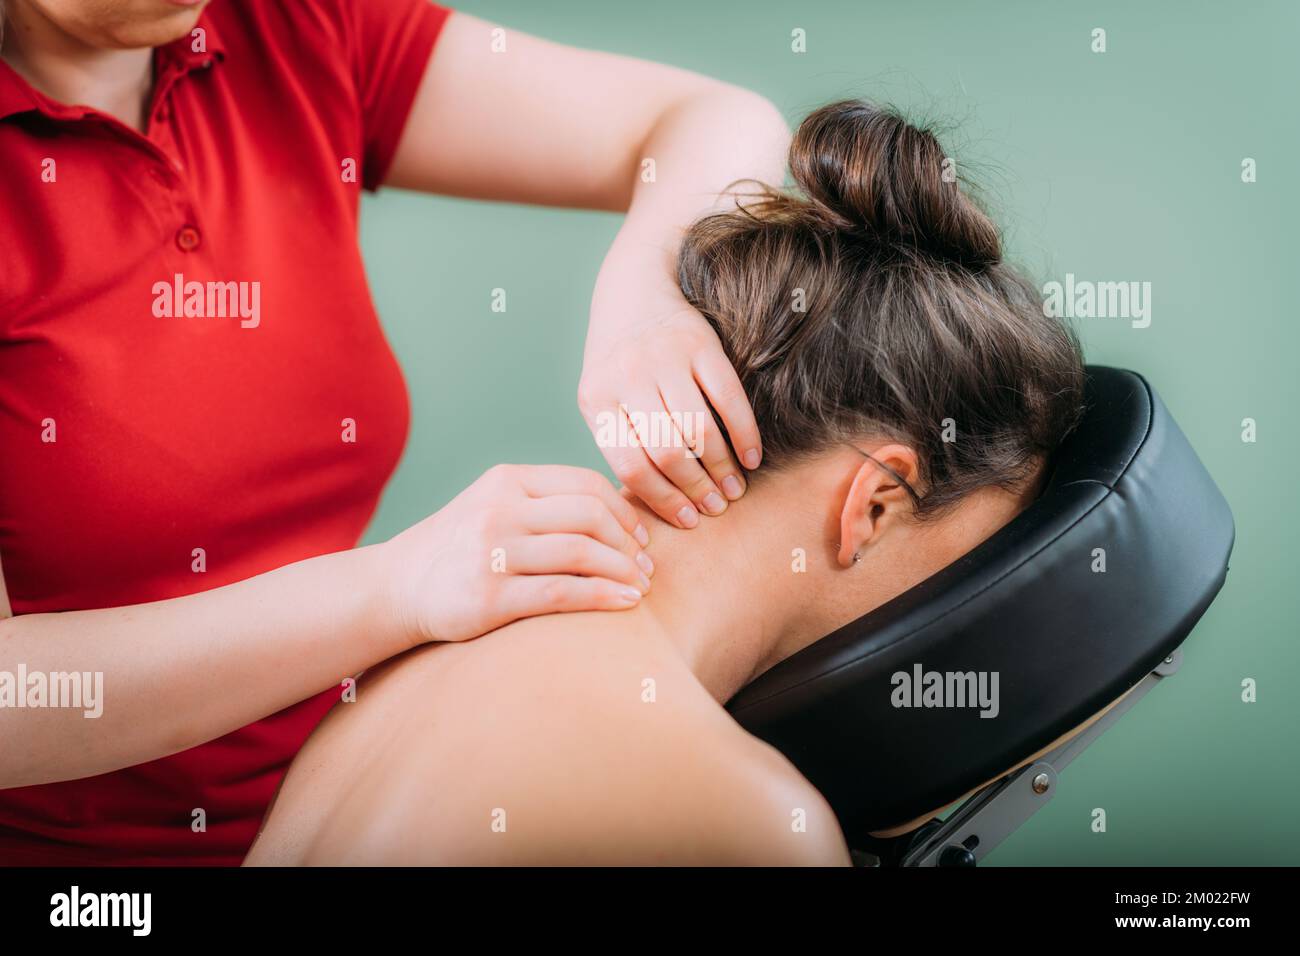 Chair massage. Therapist massaging womans neck for stress and tension relief Stock Photo